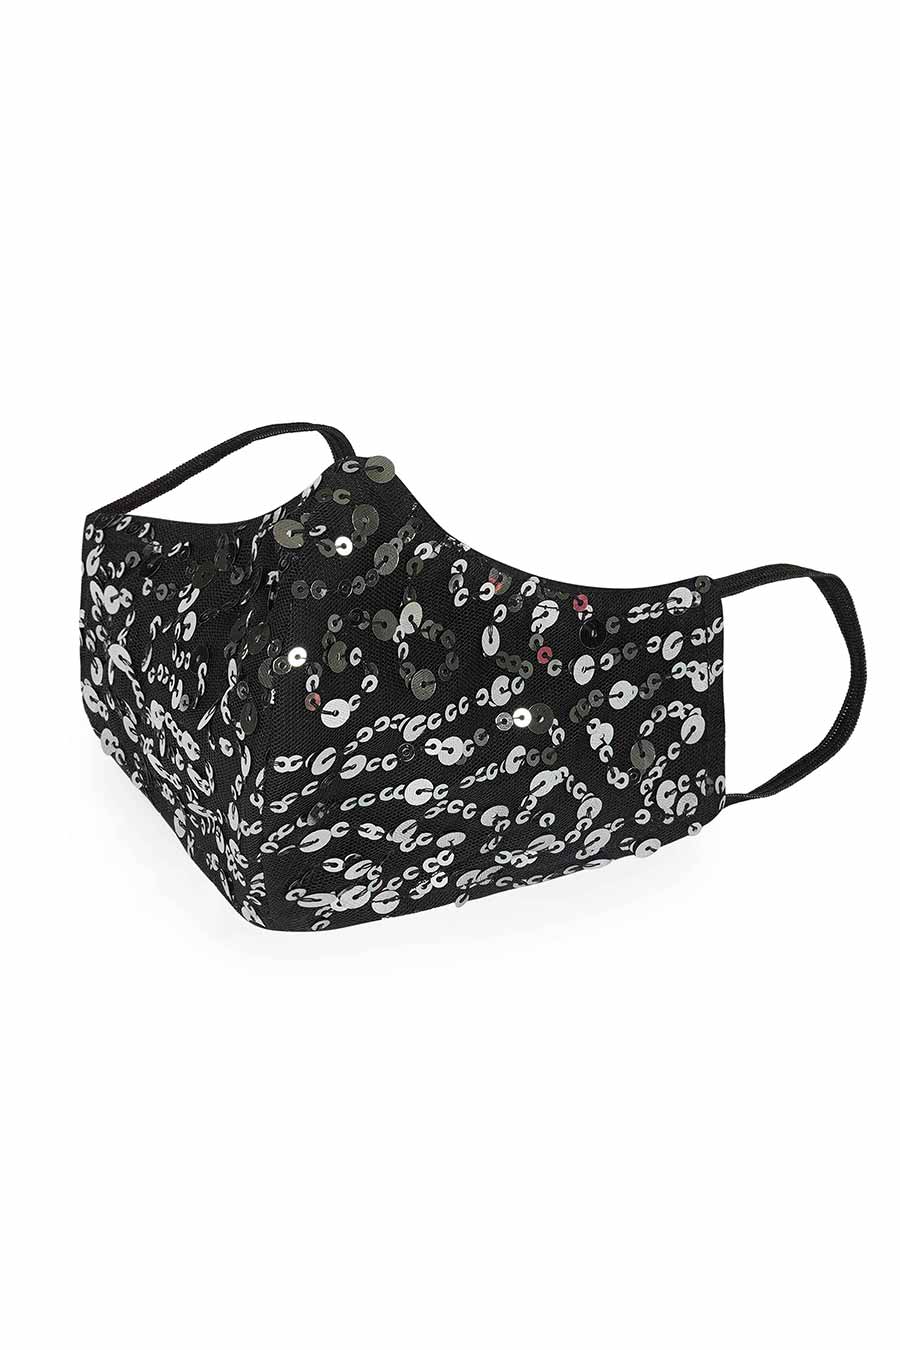 Sequin Embroidered Black 3 Ply Mask